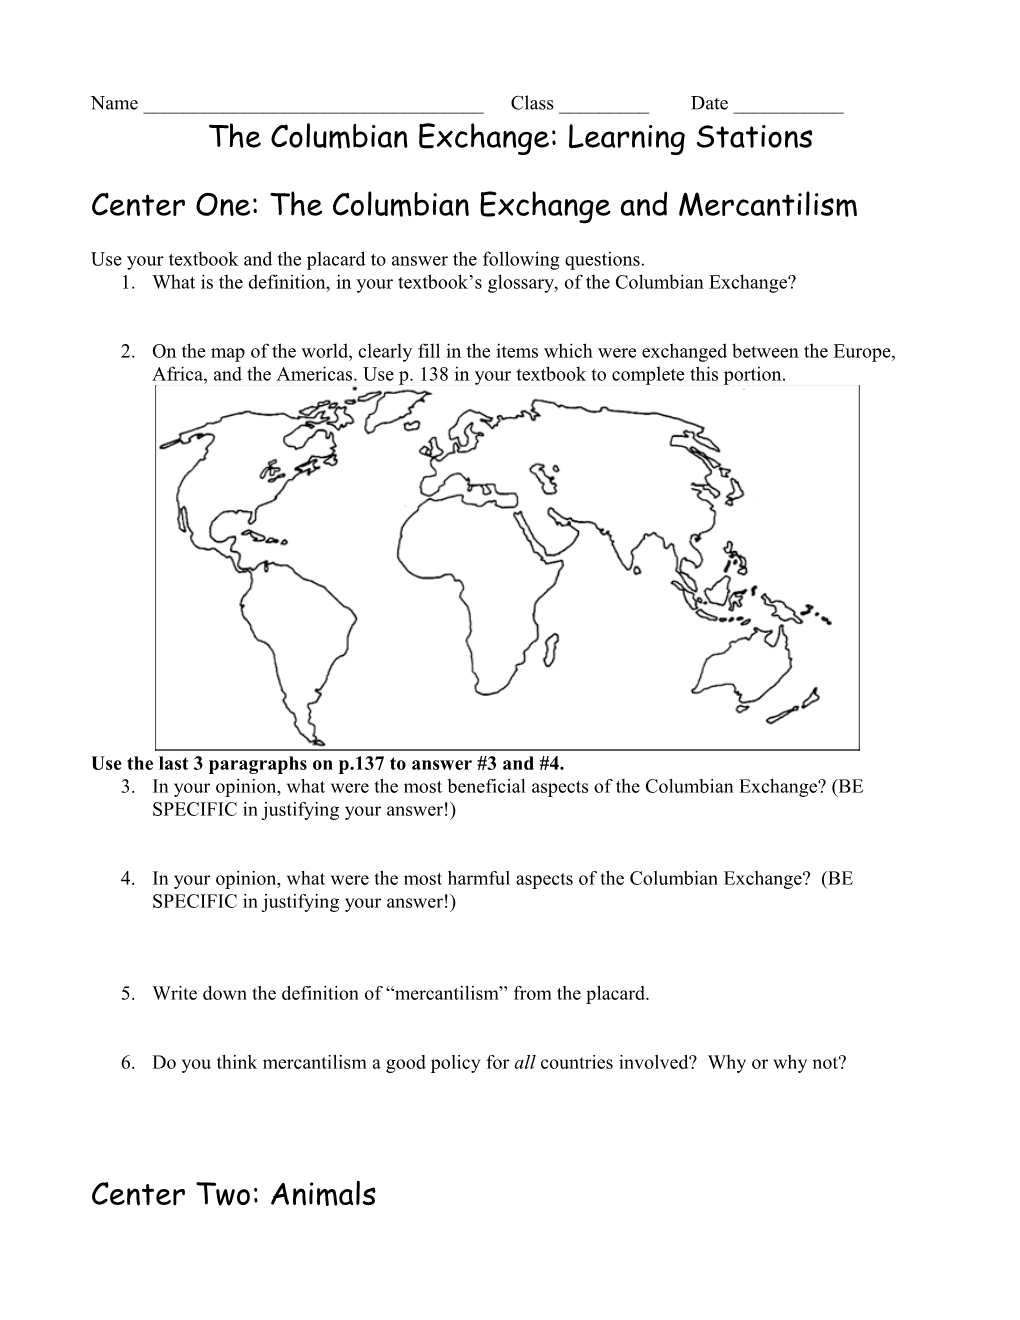 The Columbian Exchange: Learning Stations